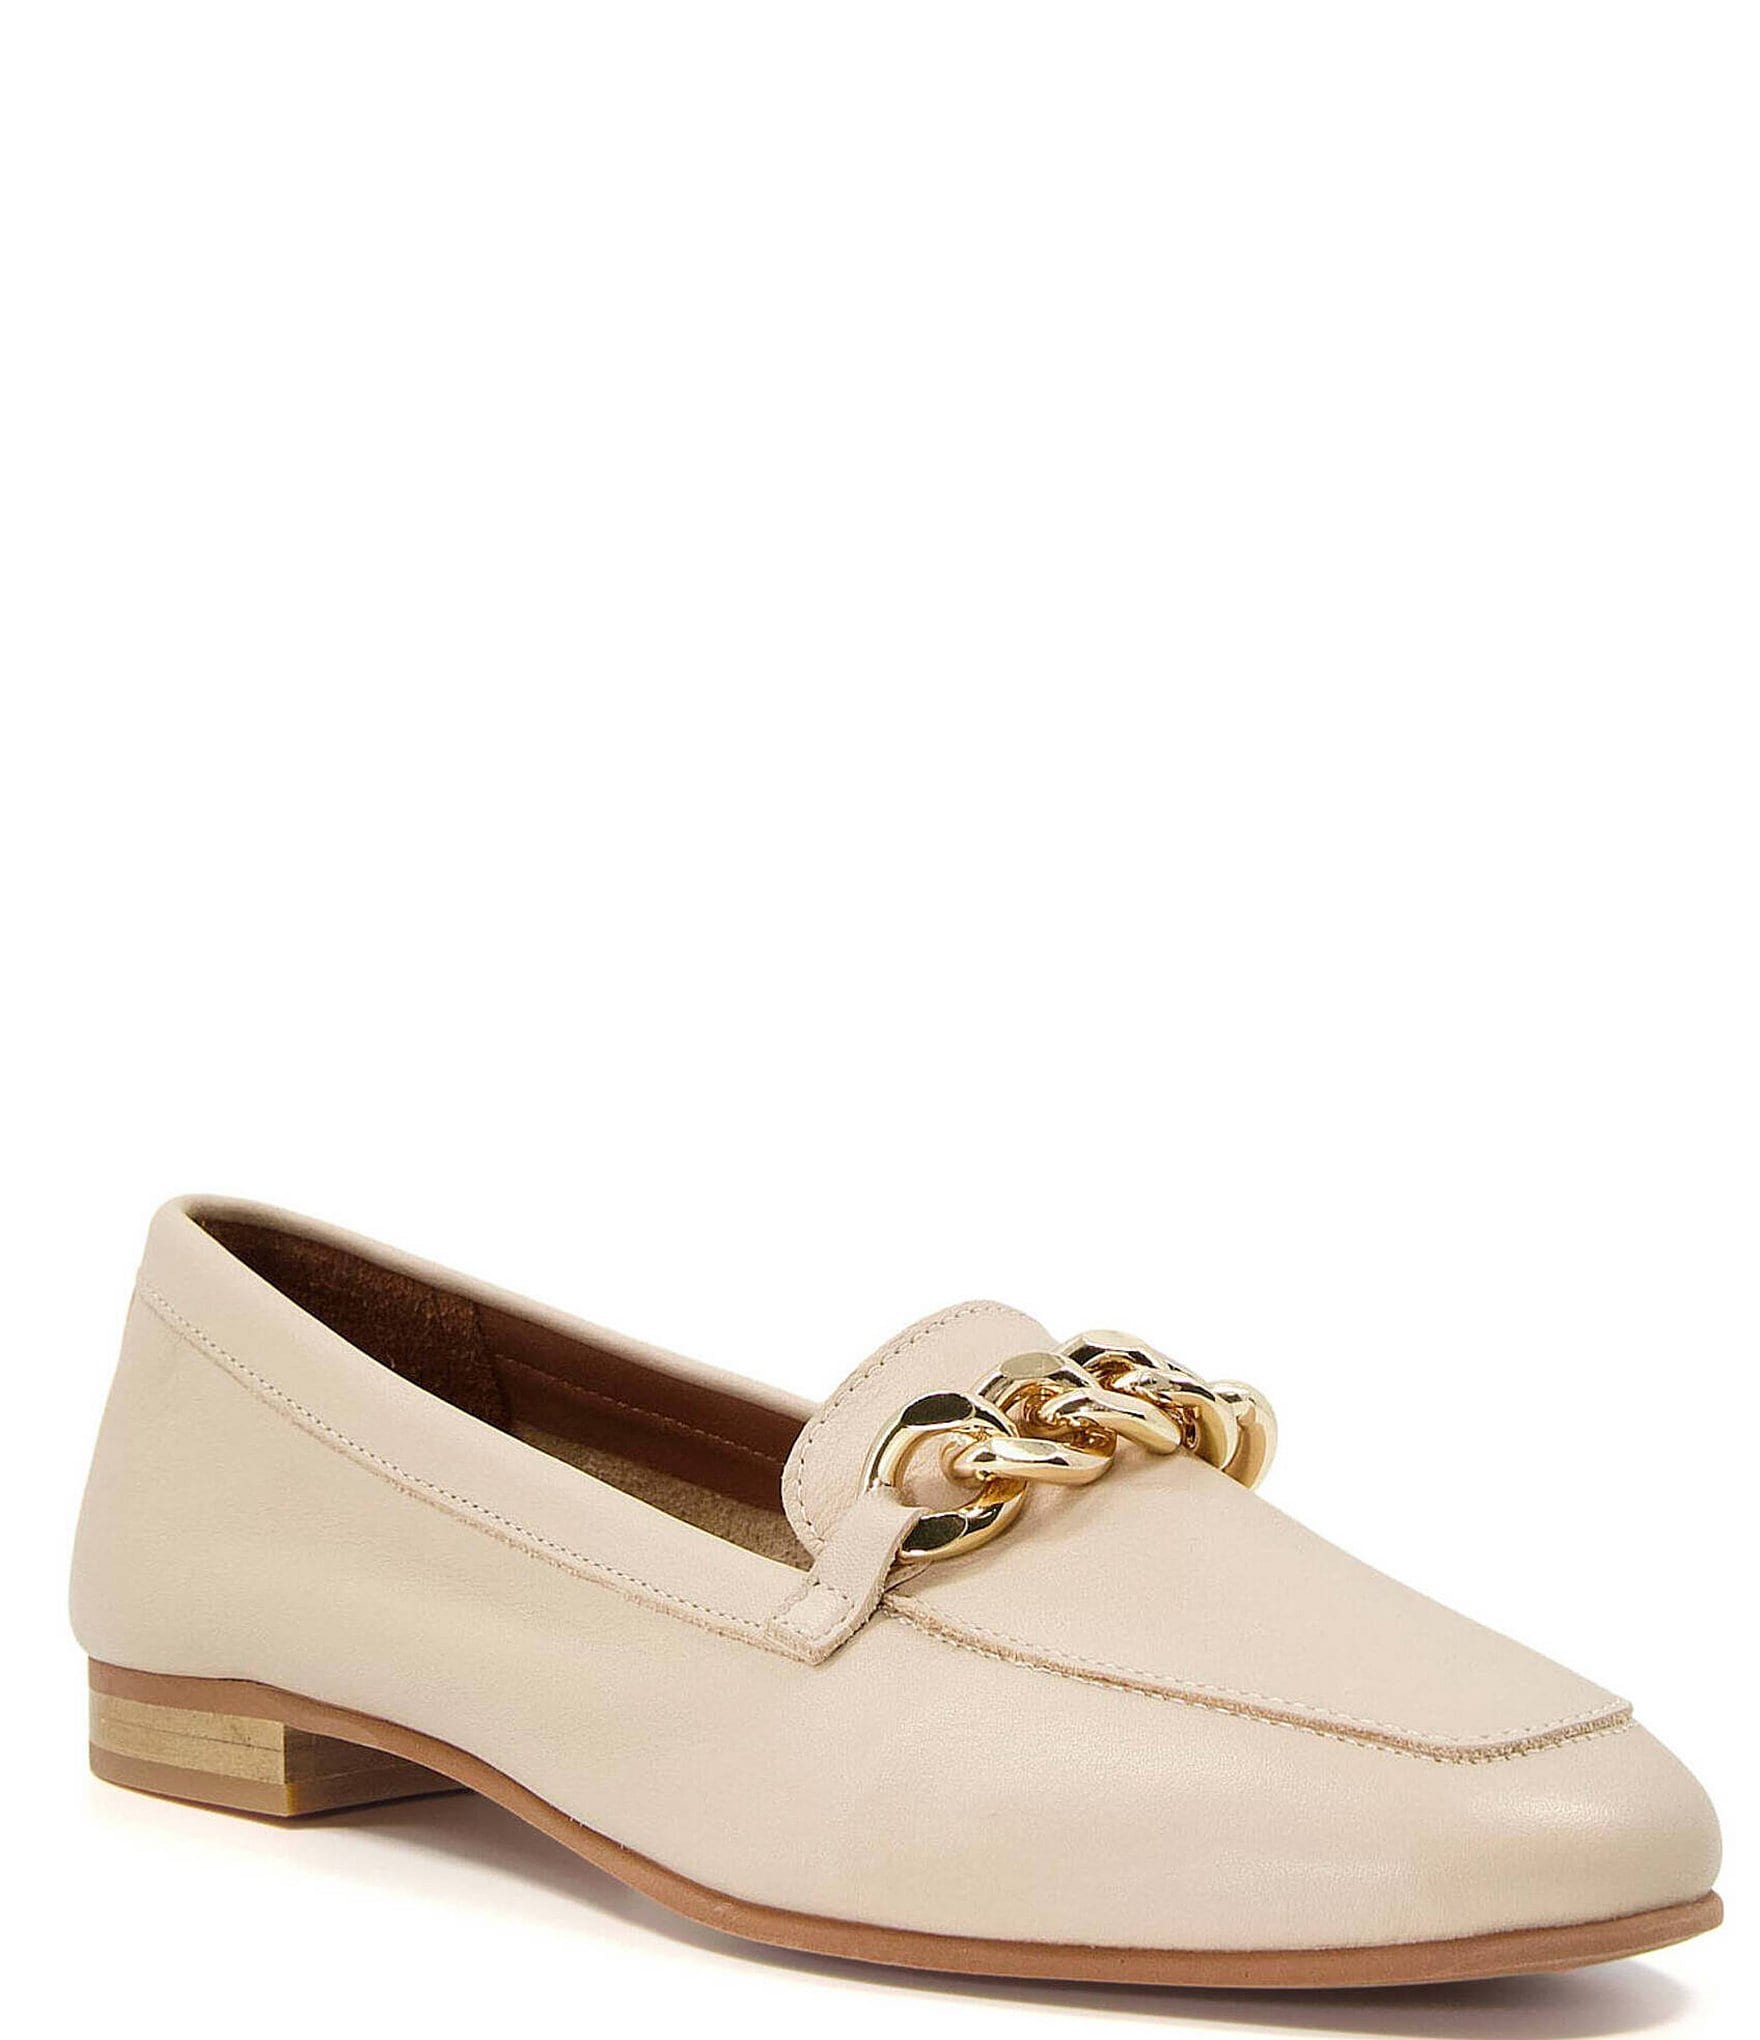 Dune London Goldsmith Leather Chain Detail Loafers | Dillard's